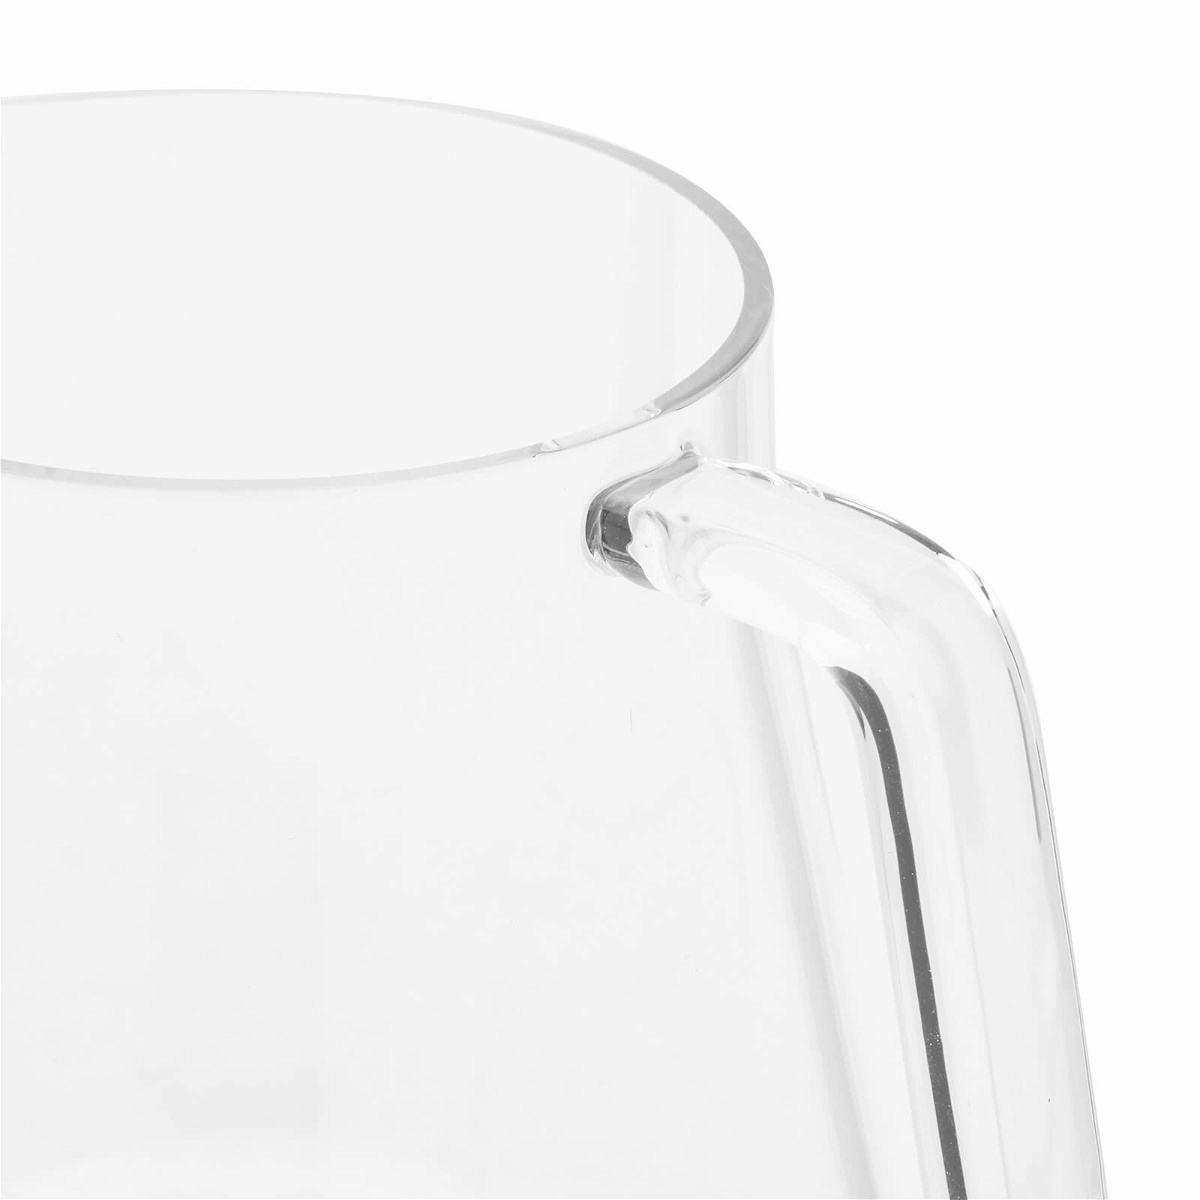 Fellow Mighty Small Glass Carafe - 300ml in Clear Fellow